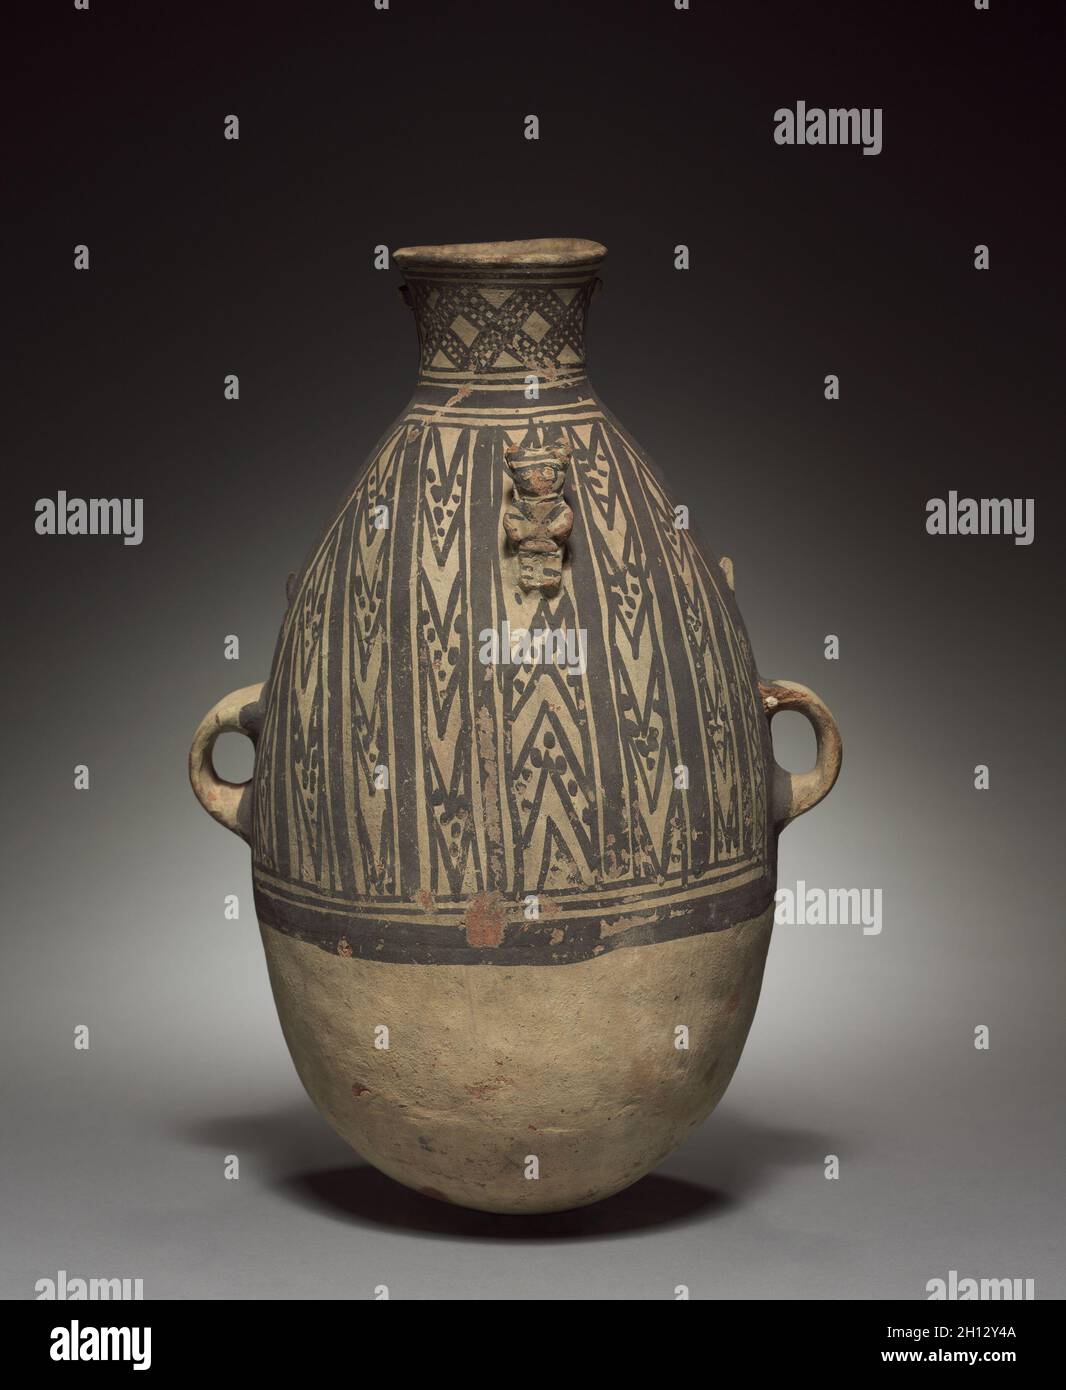 Bottle, 800-1500. Peru, Chimú, 9th-15th Century. Pottery; overall: 40.1 x 25.7 x 23.5 cm (15 13/16 x 10 1/8 x 9 1/4 in.). Stock Photo